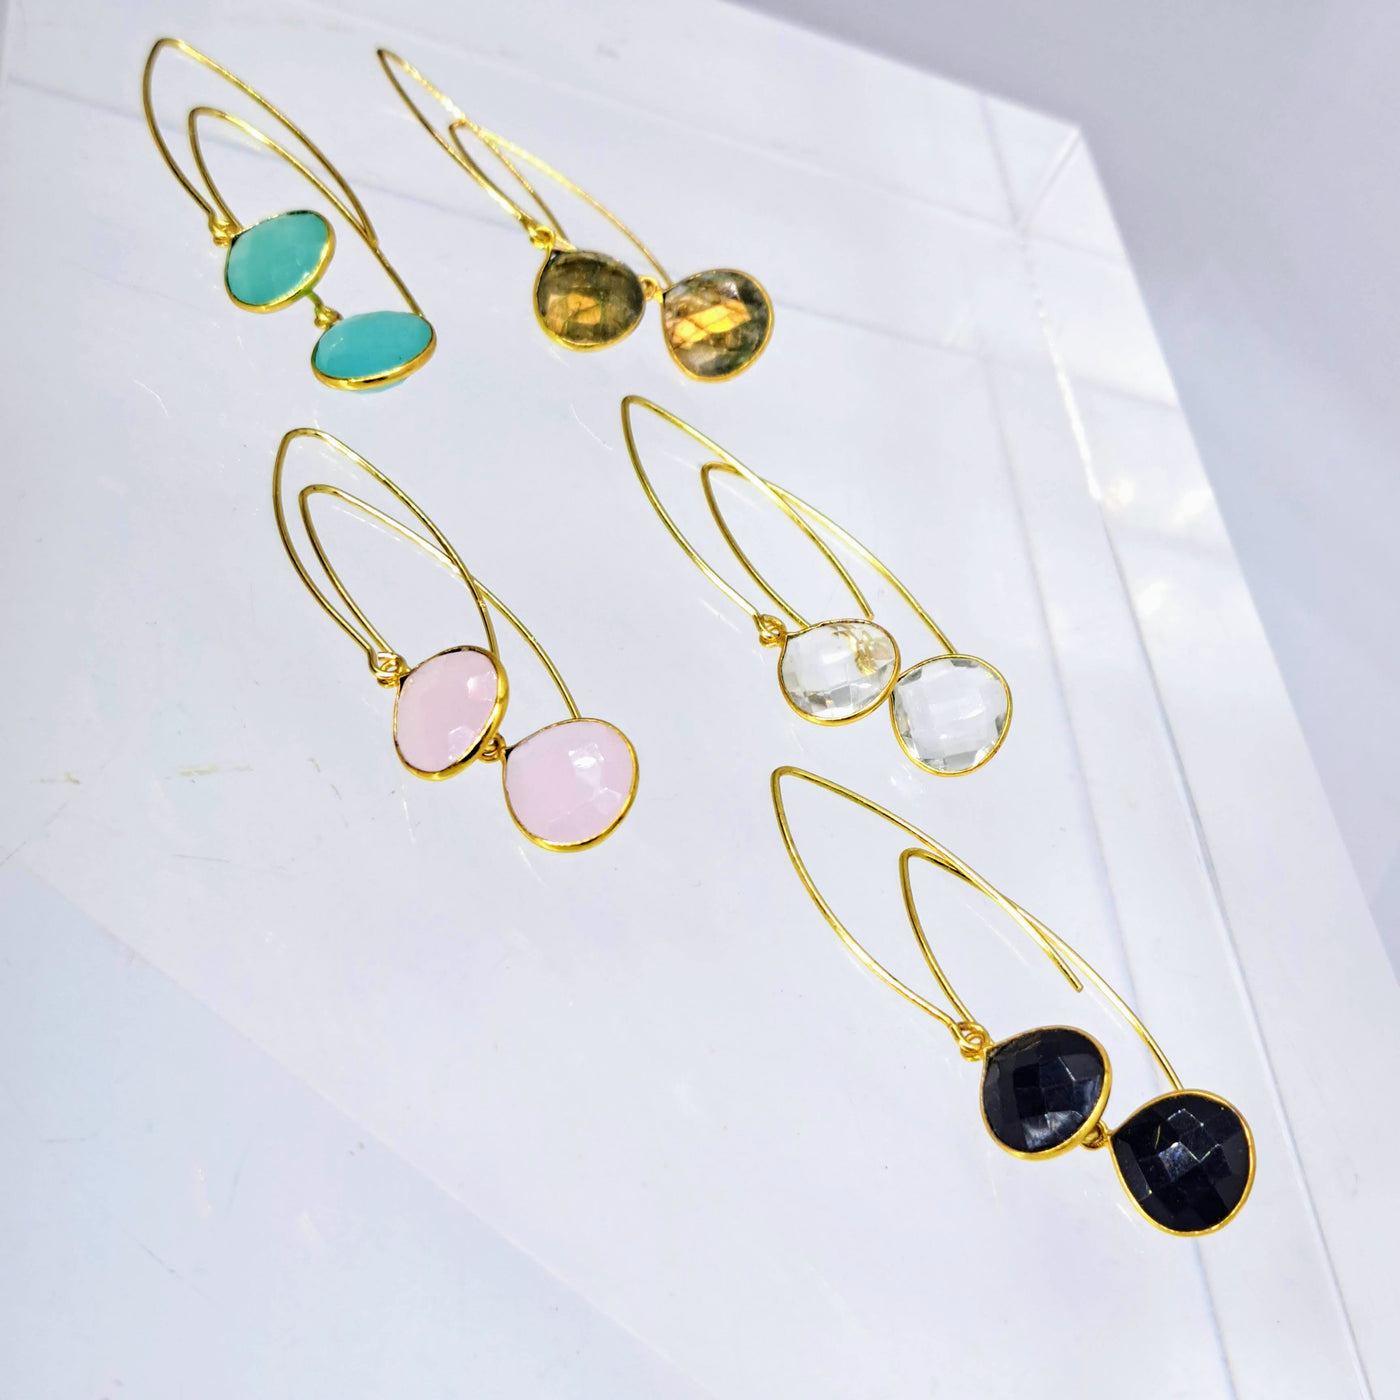 "Gum Drops" 2.25" Earrings - Your Choice of Gemstones, Sterling/Gold Sterling